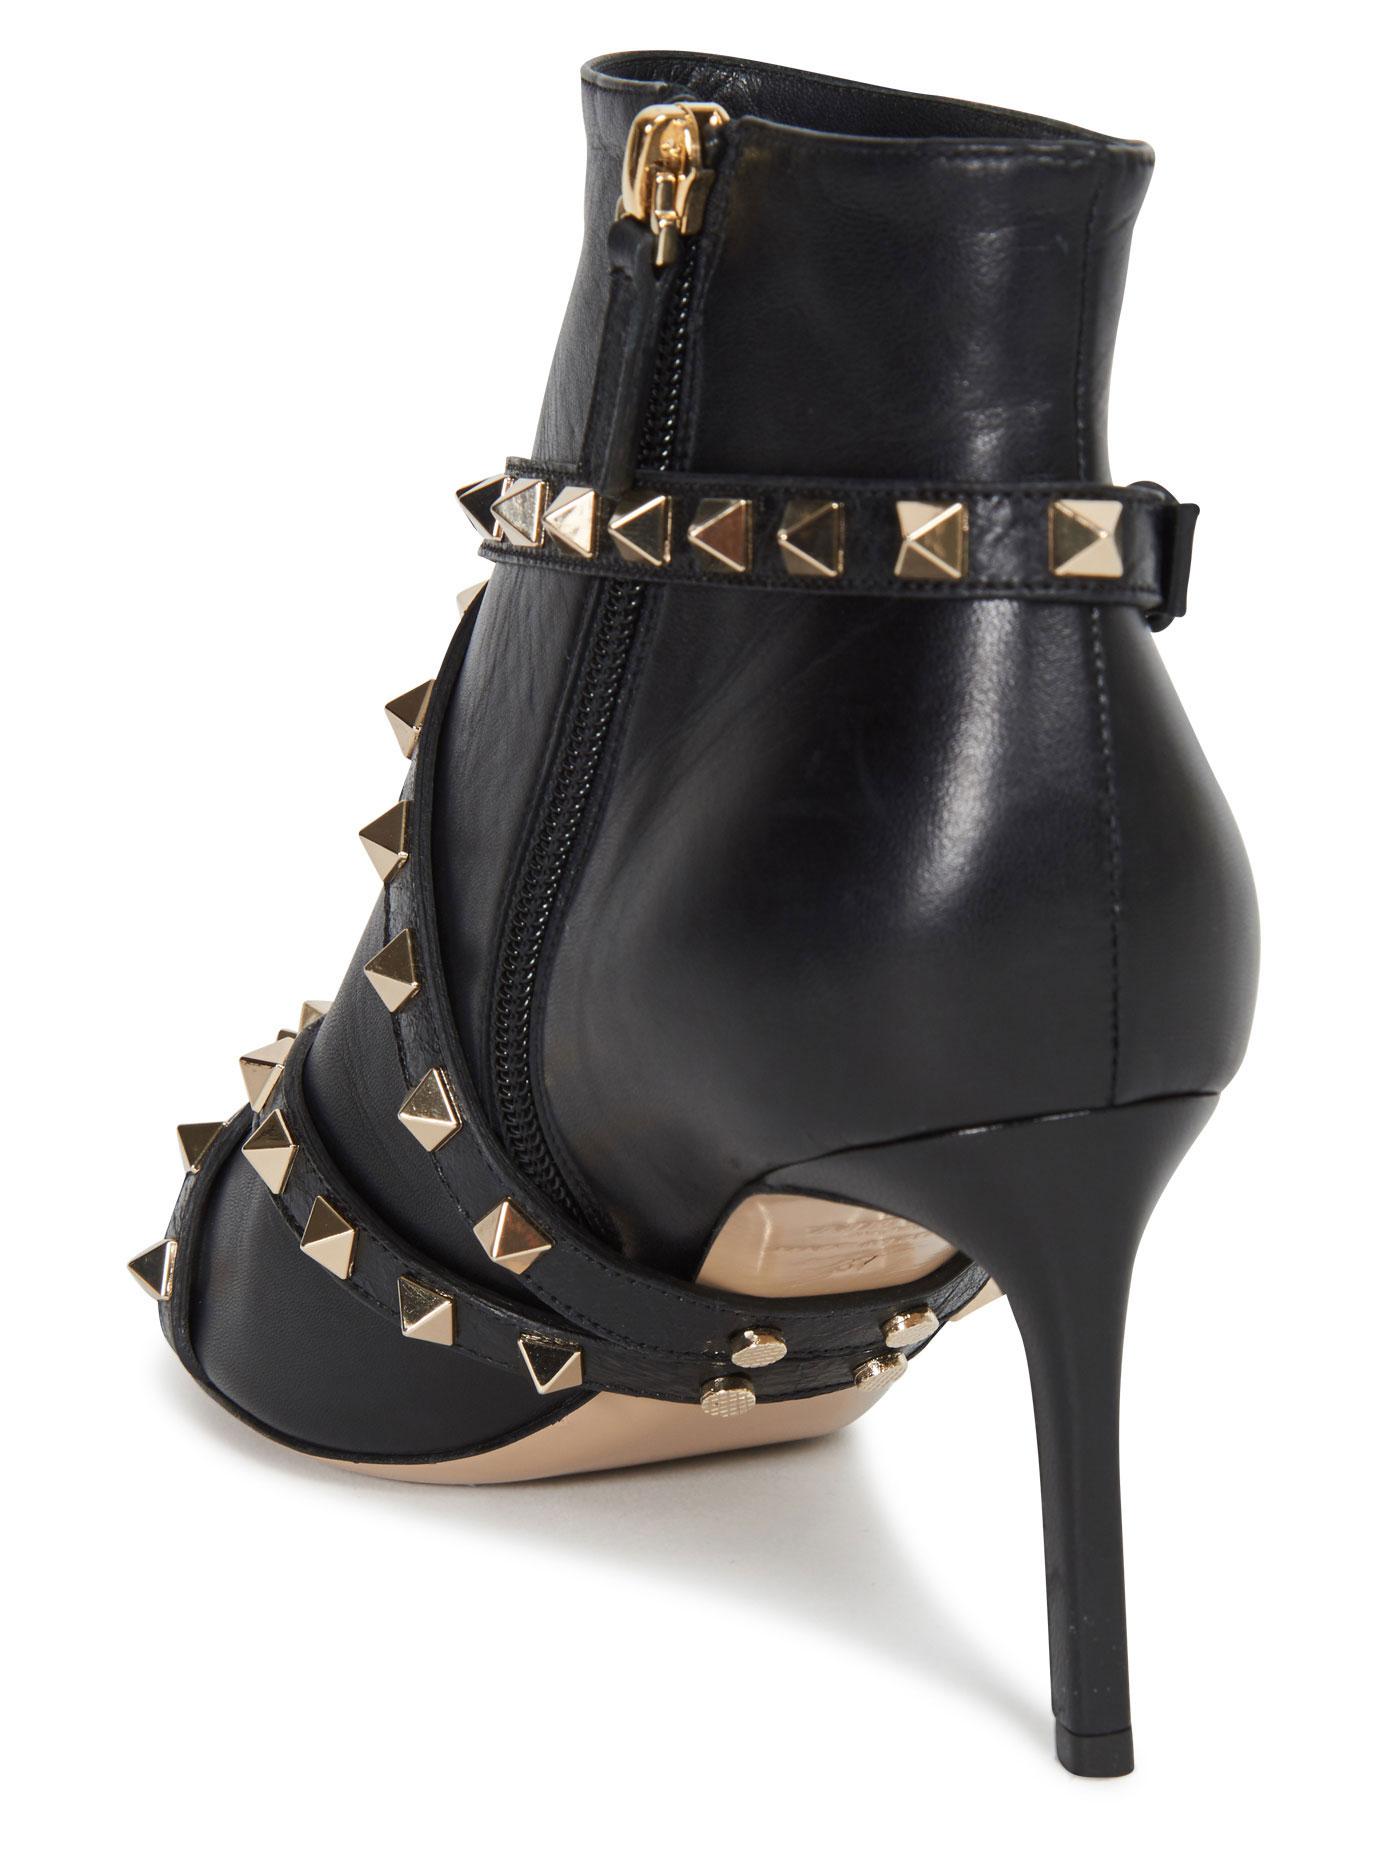 Valentino Rockstud Mid Heel Leather Ankle Boots in Black - Lyst